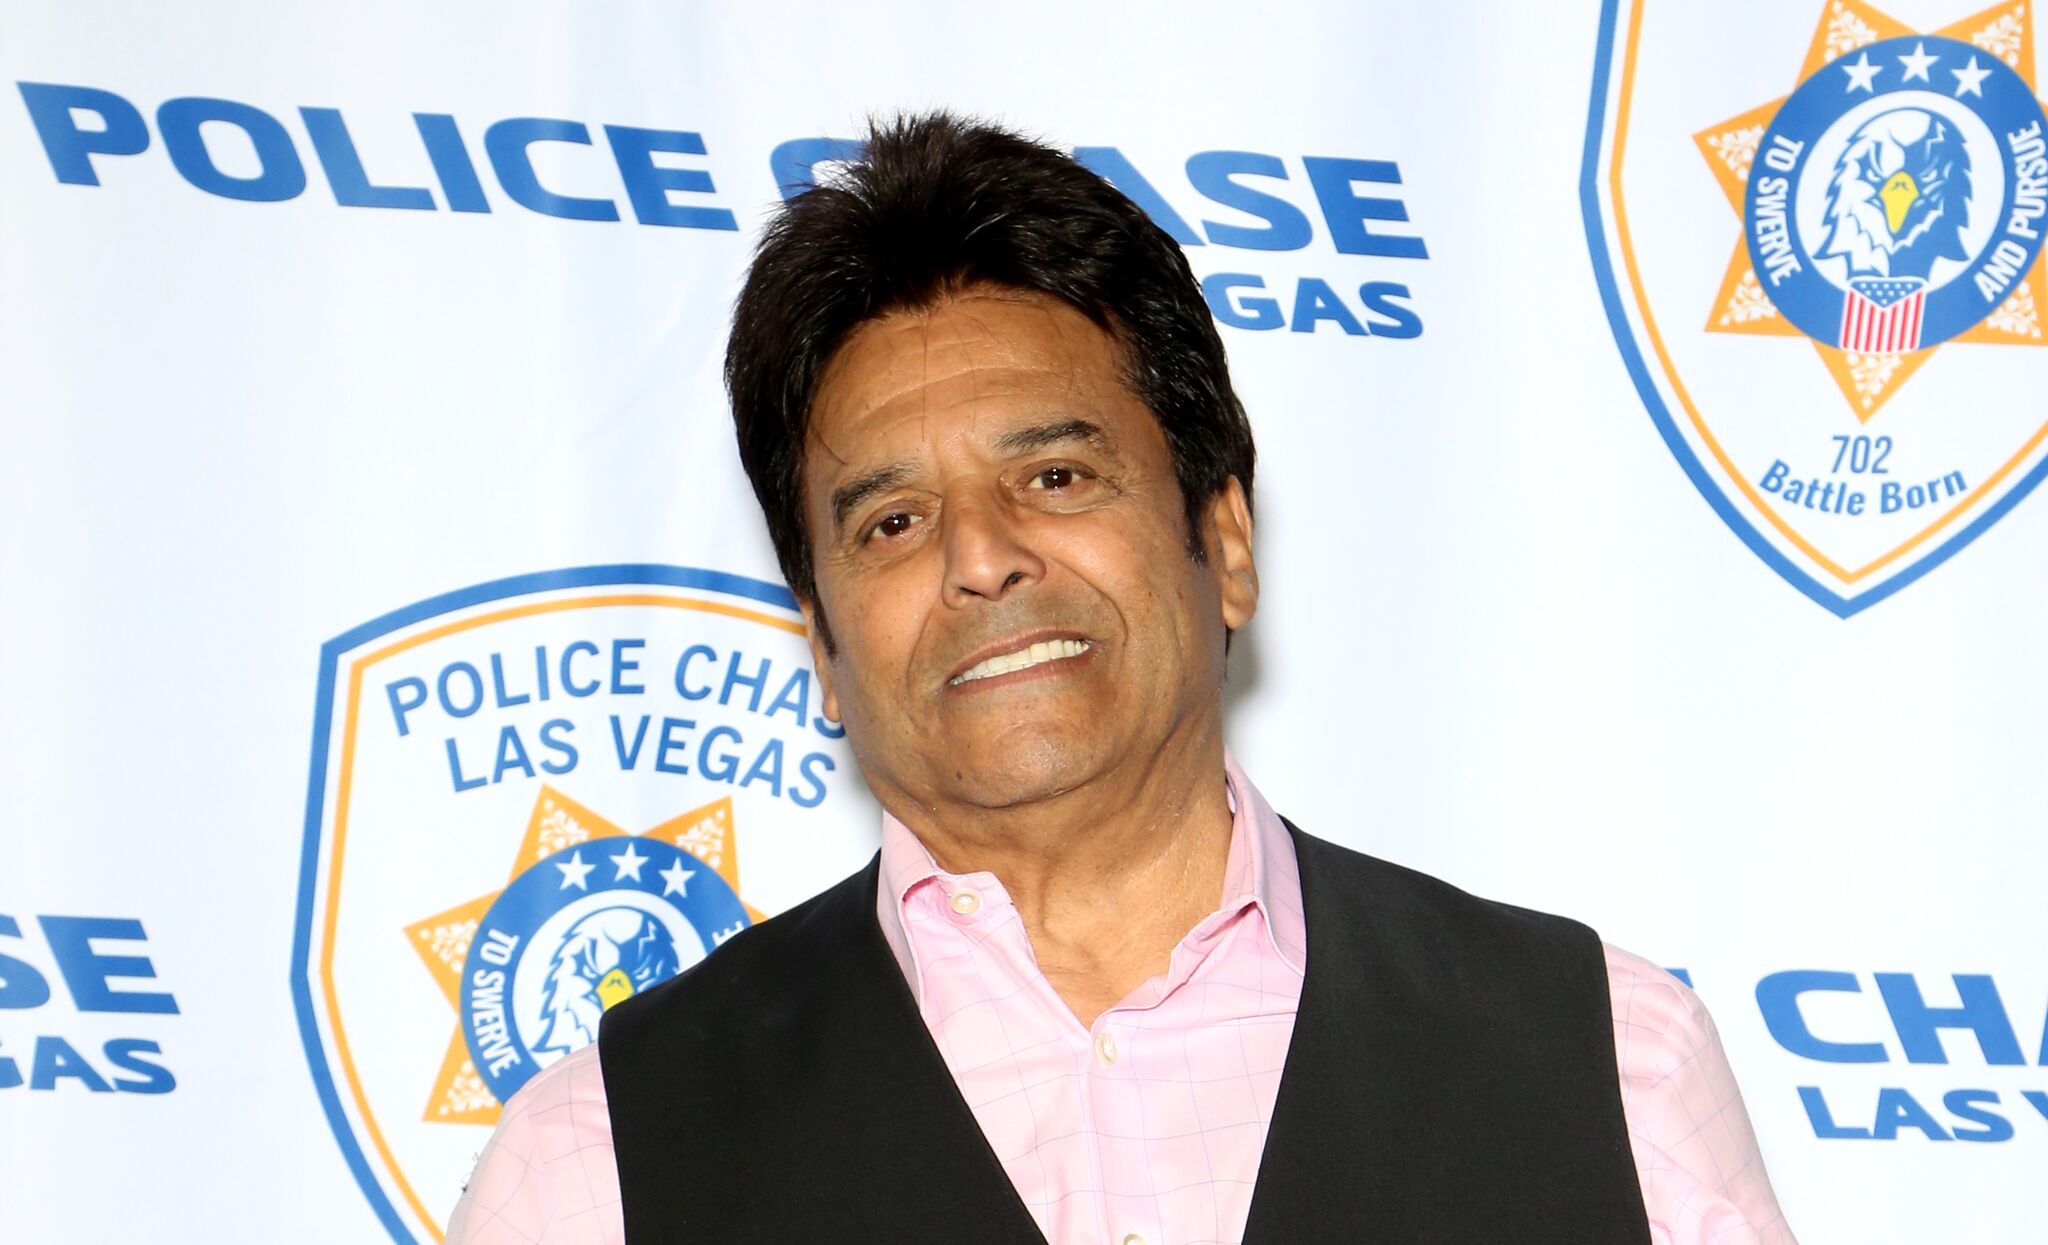 Actor Erik Estrada attends the grand opening of Police Chase Las Vegas on January 19, 2019 in Las Vegas, Nevada. | Getty Images